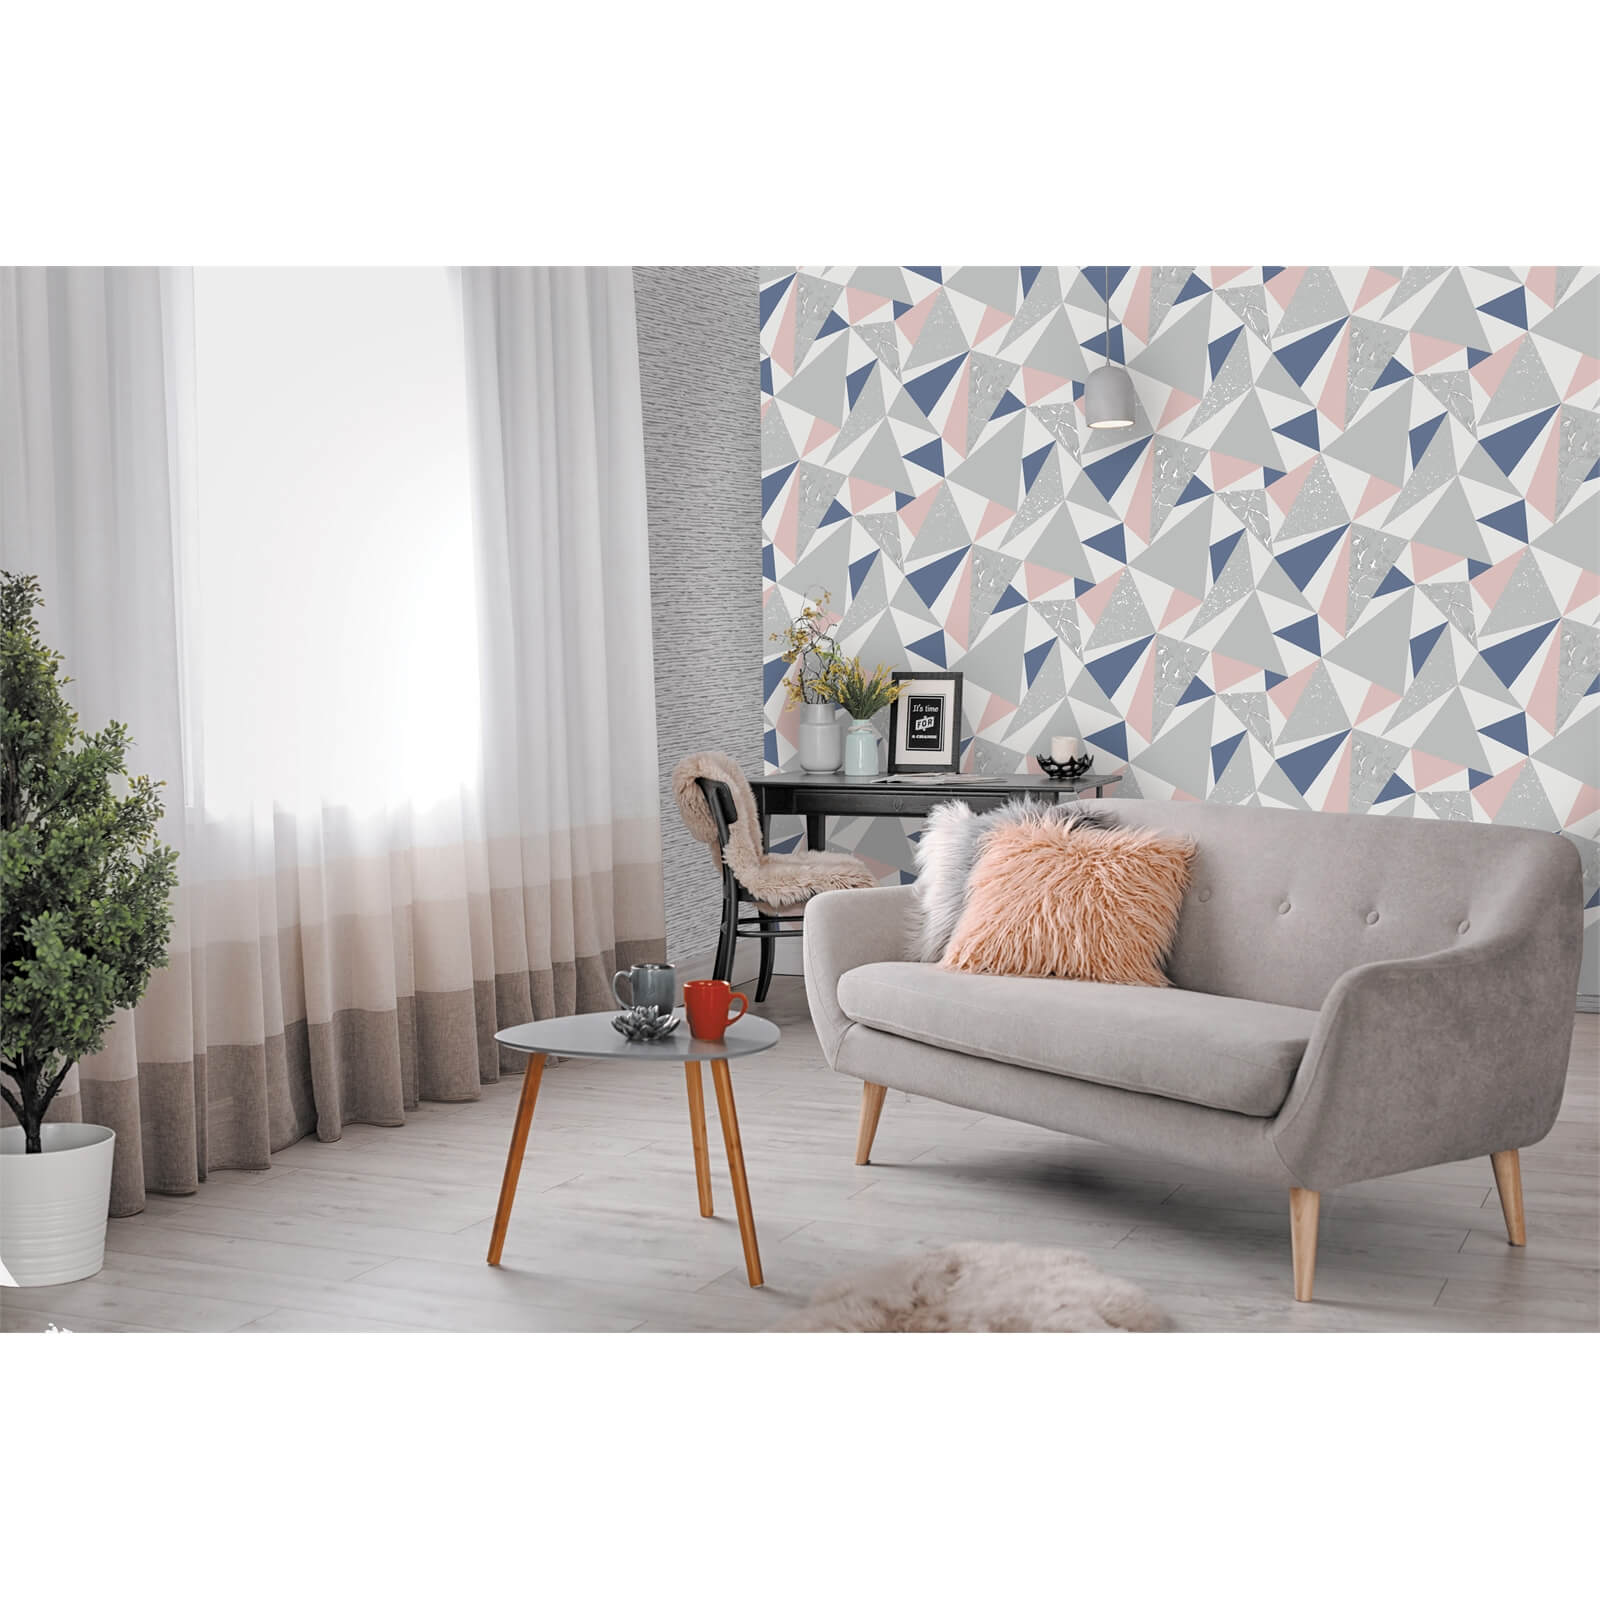 Holden Decor Glacier Geometric Smooth Metallic Navy and Coral Wallpaper